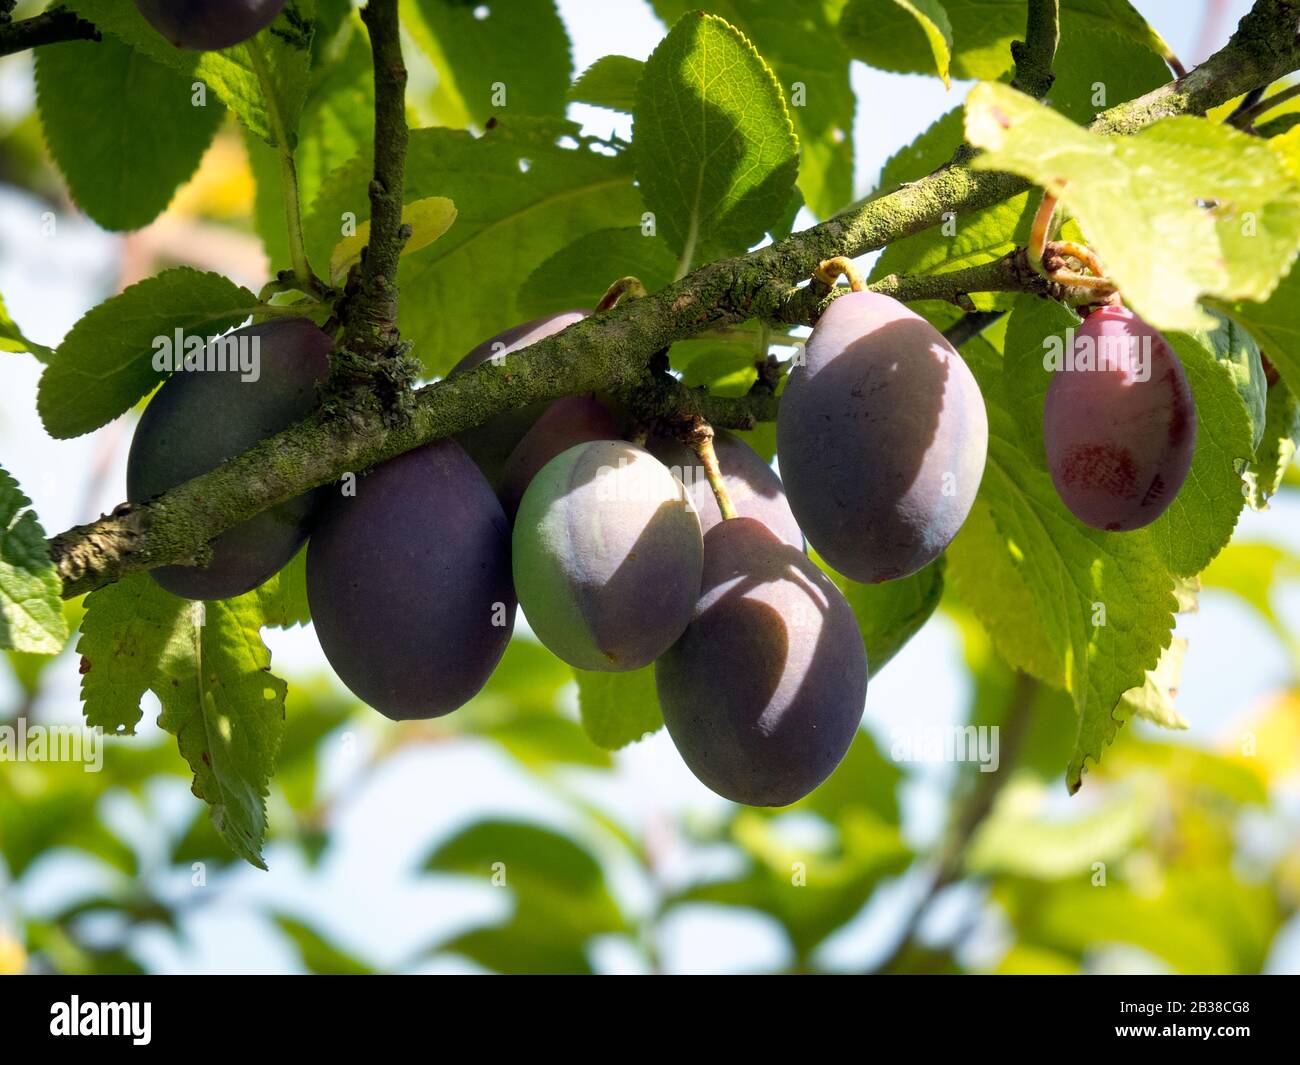 Bunch of Plums ripening in the sunshine Stock Photo